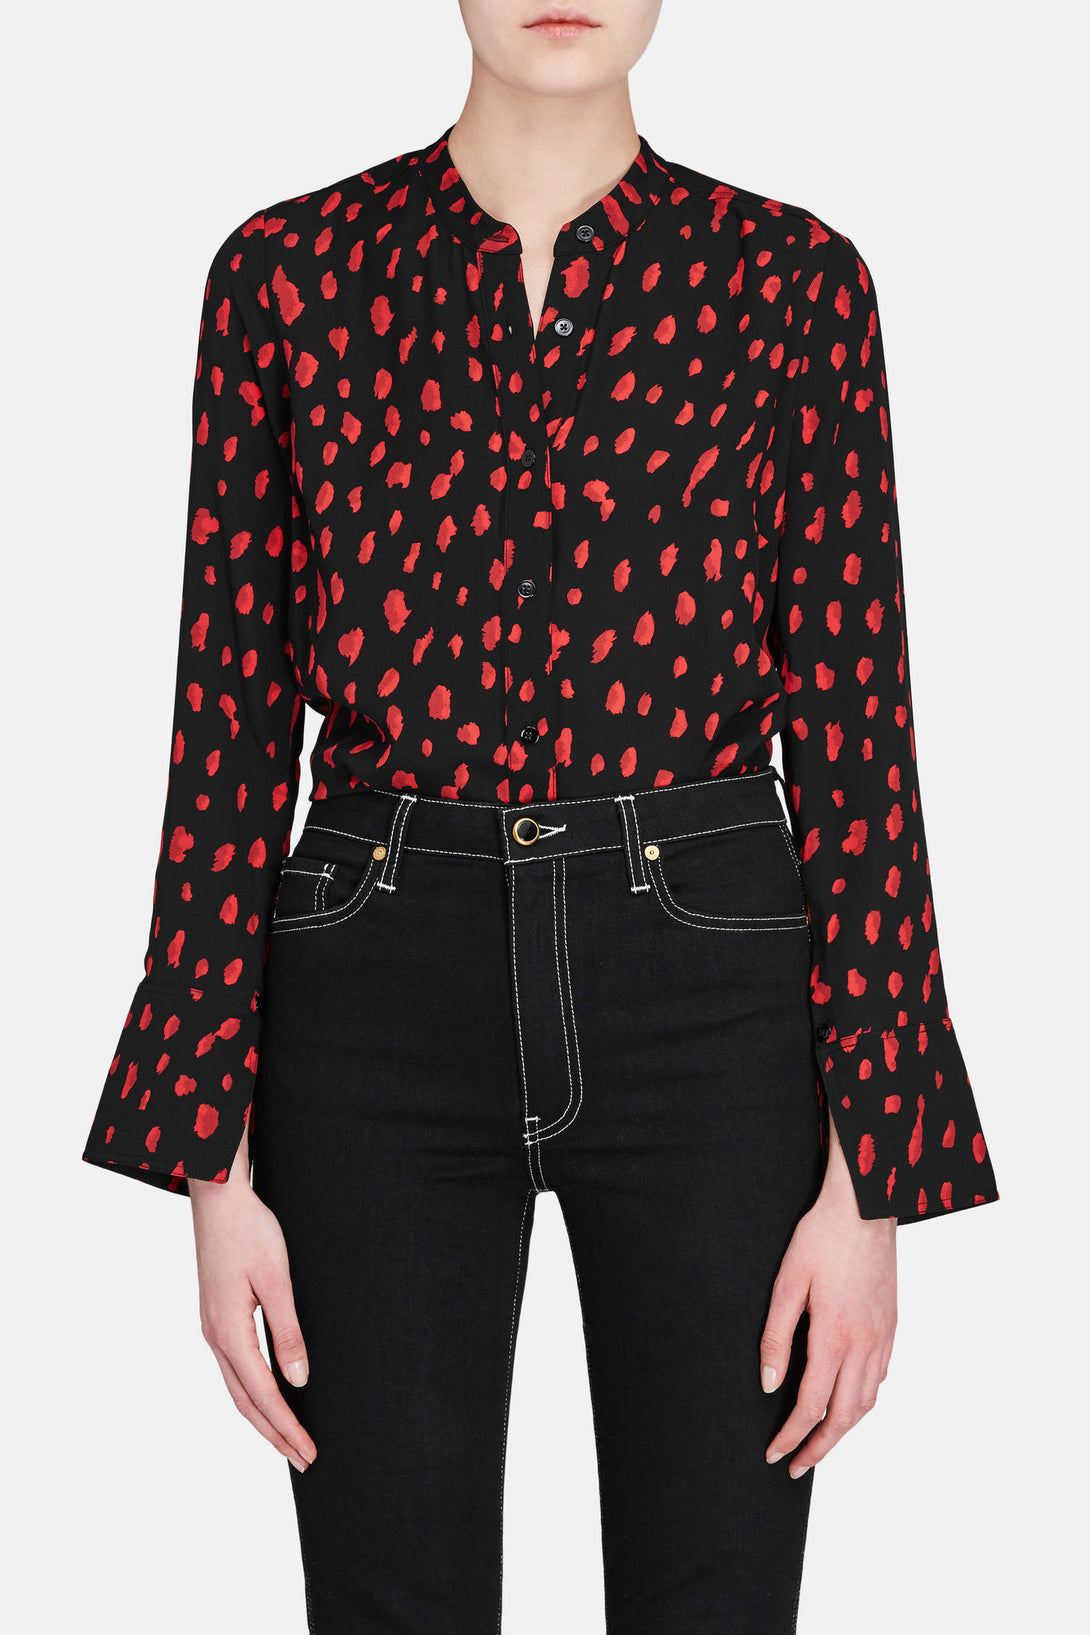 red black button up